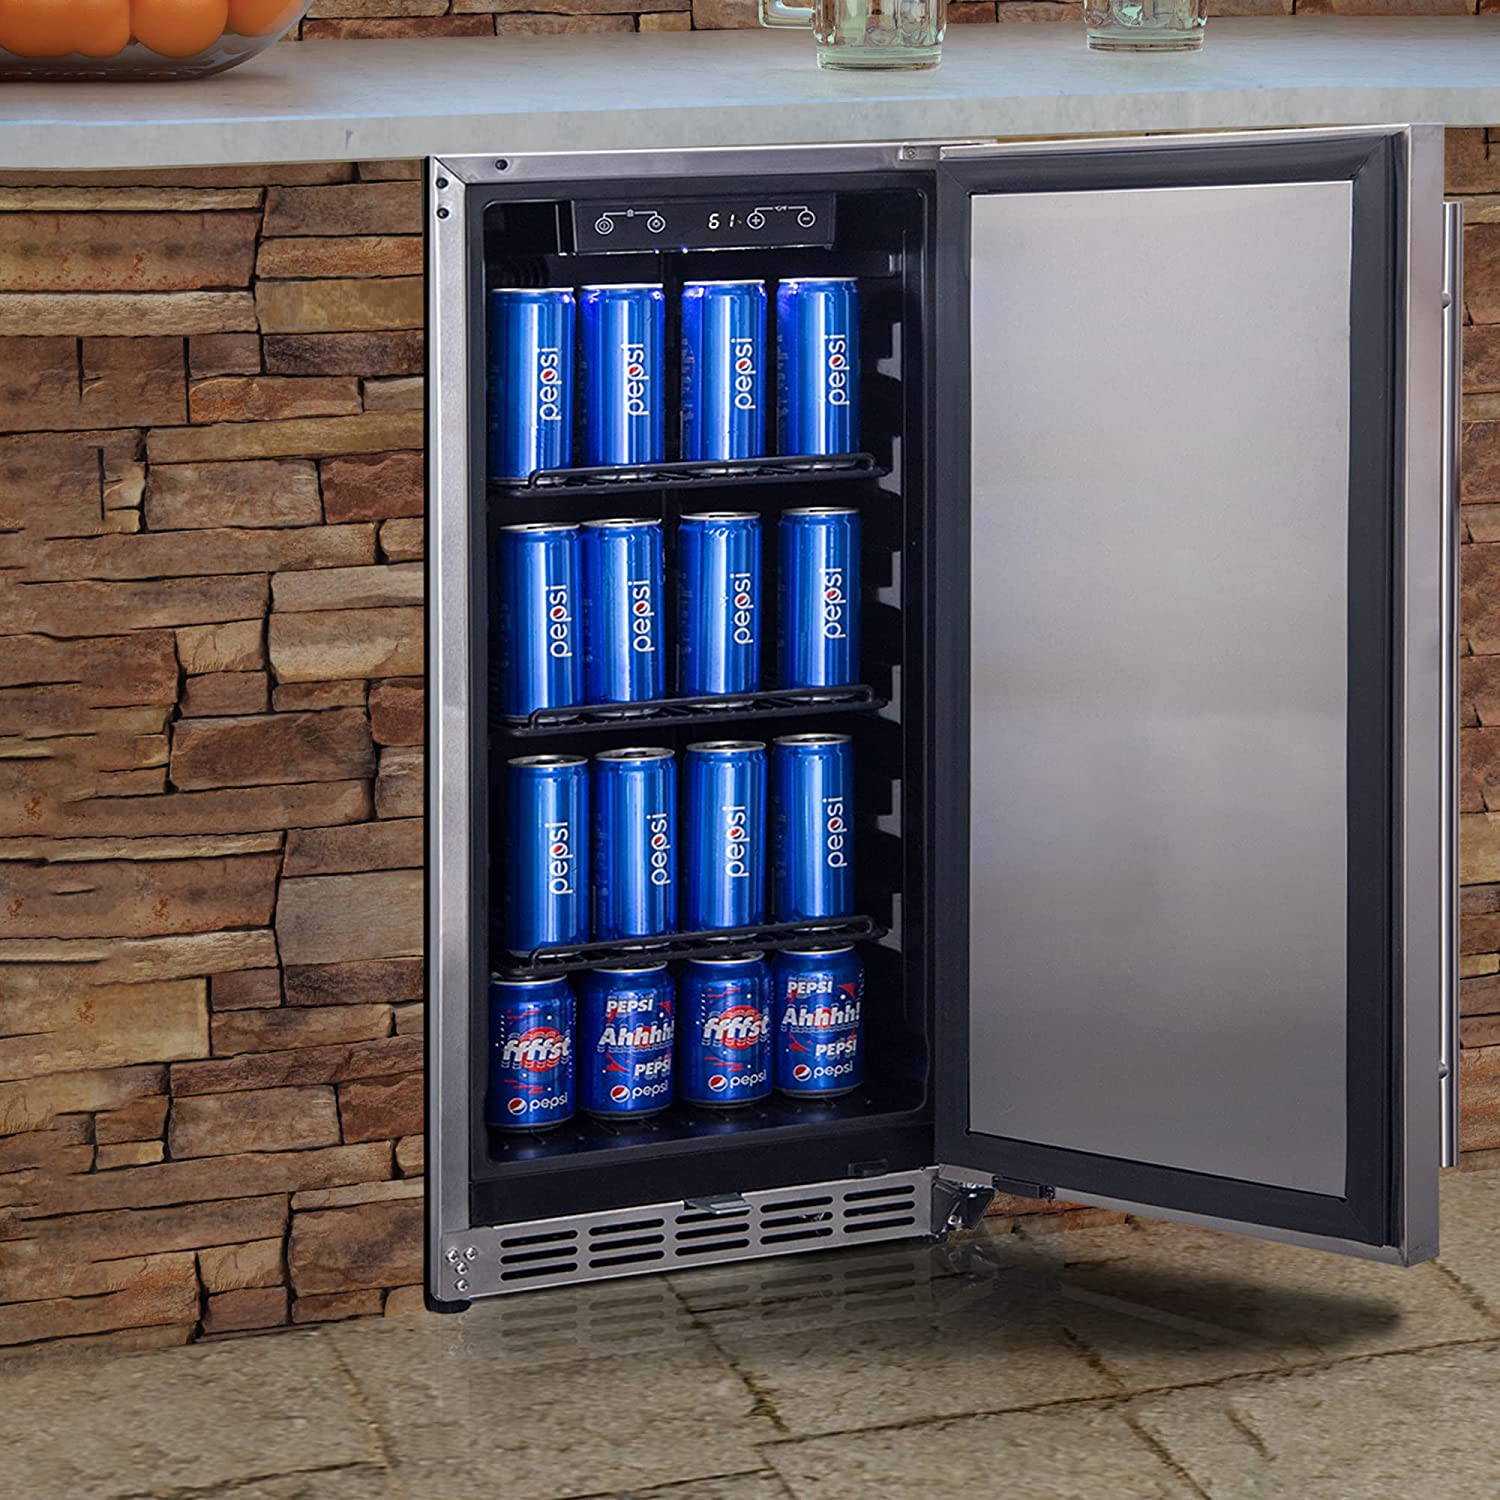 3.2 Cu Ft Compact Outdoor Refrigerator 96 cans